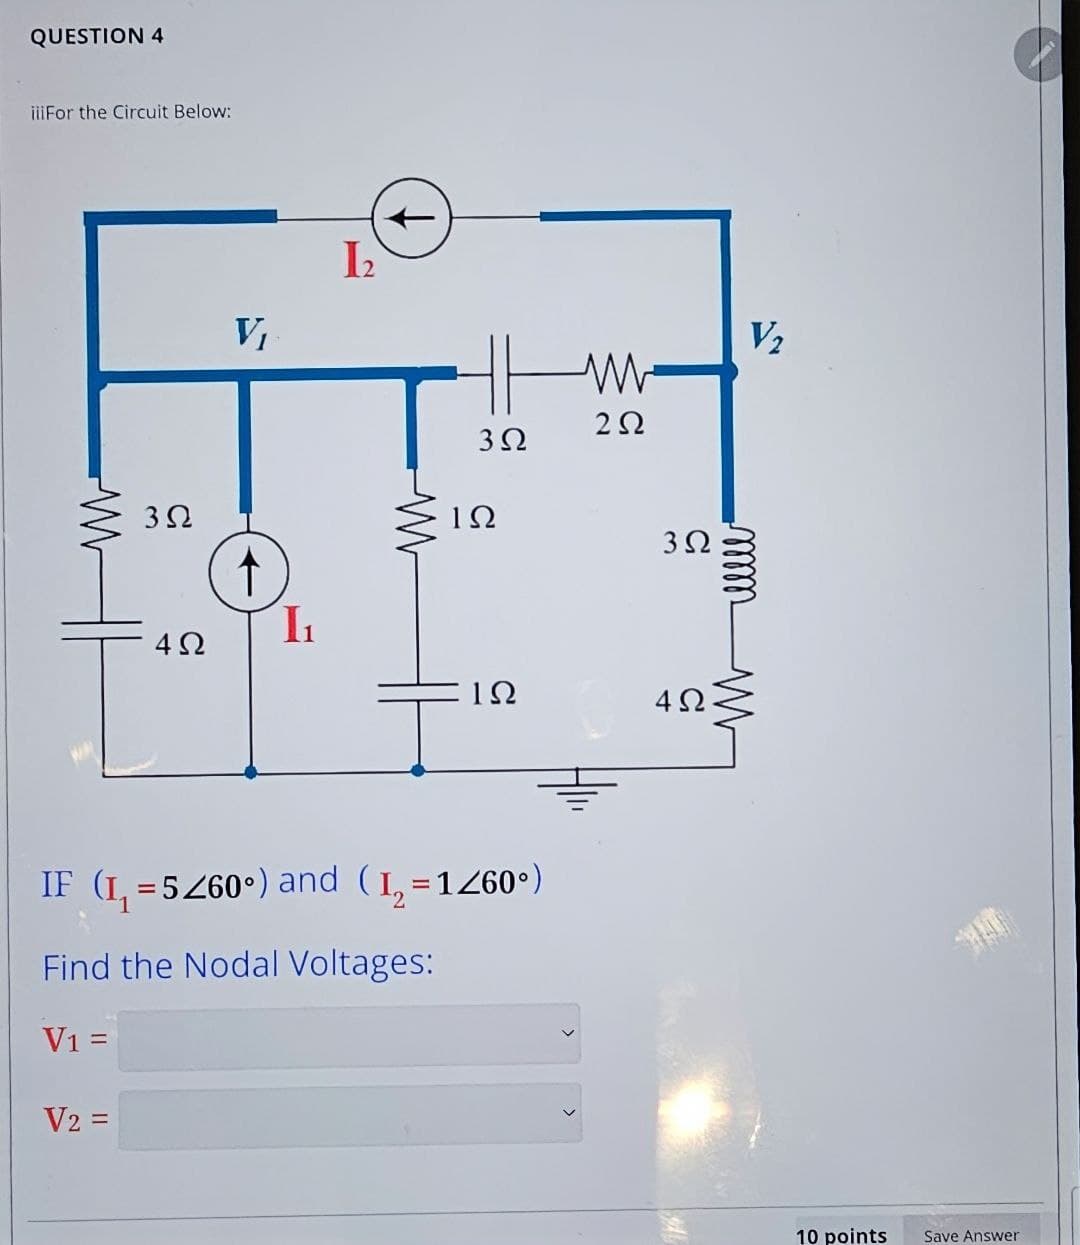 QUESTION 4
iiiFor the Circuit Below:
352
V₁
12
ww
252
302
102
352
I₁
402
ΙΩ
4Ω
IF (I₁ =5260°) and (12=1/60°)
Find the Nodal Voltages:
V₁ =
V2 =
V2
mmm
10 points
Save Answer